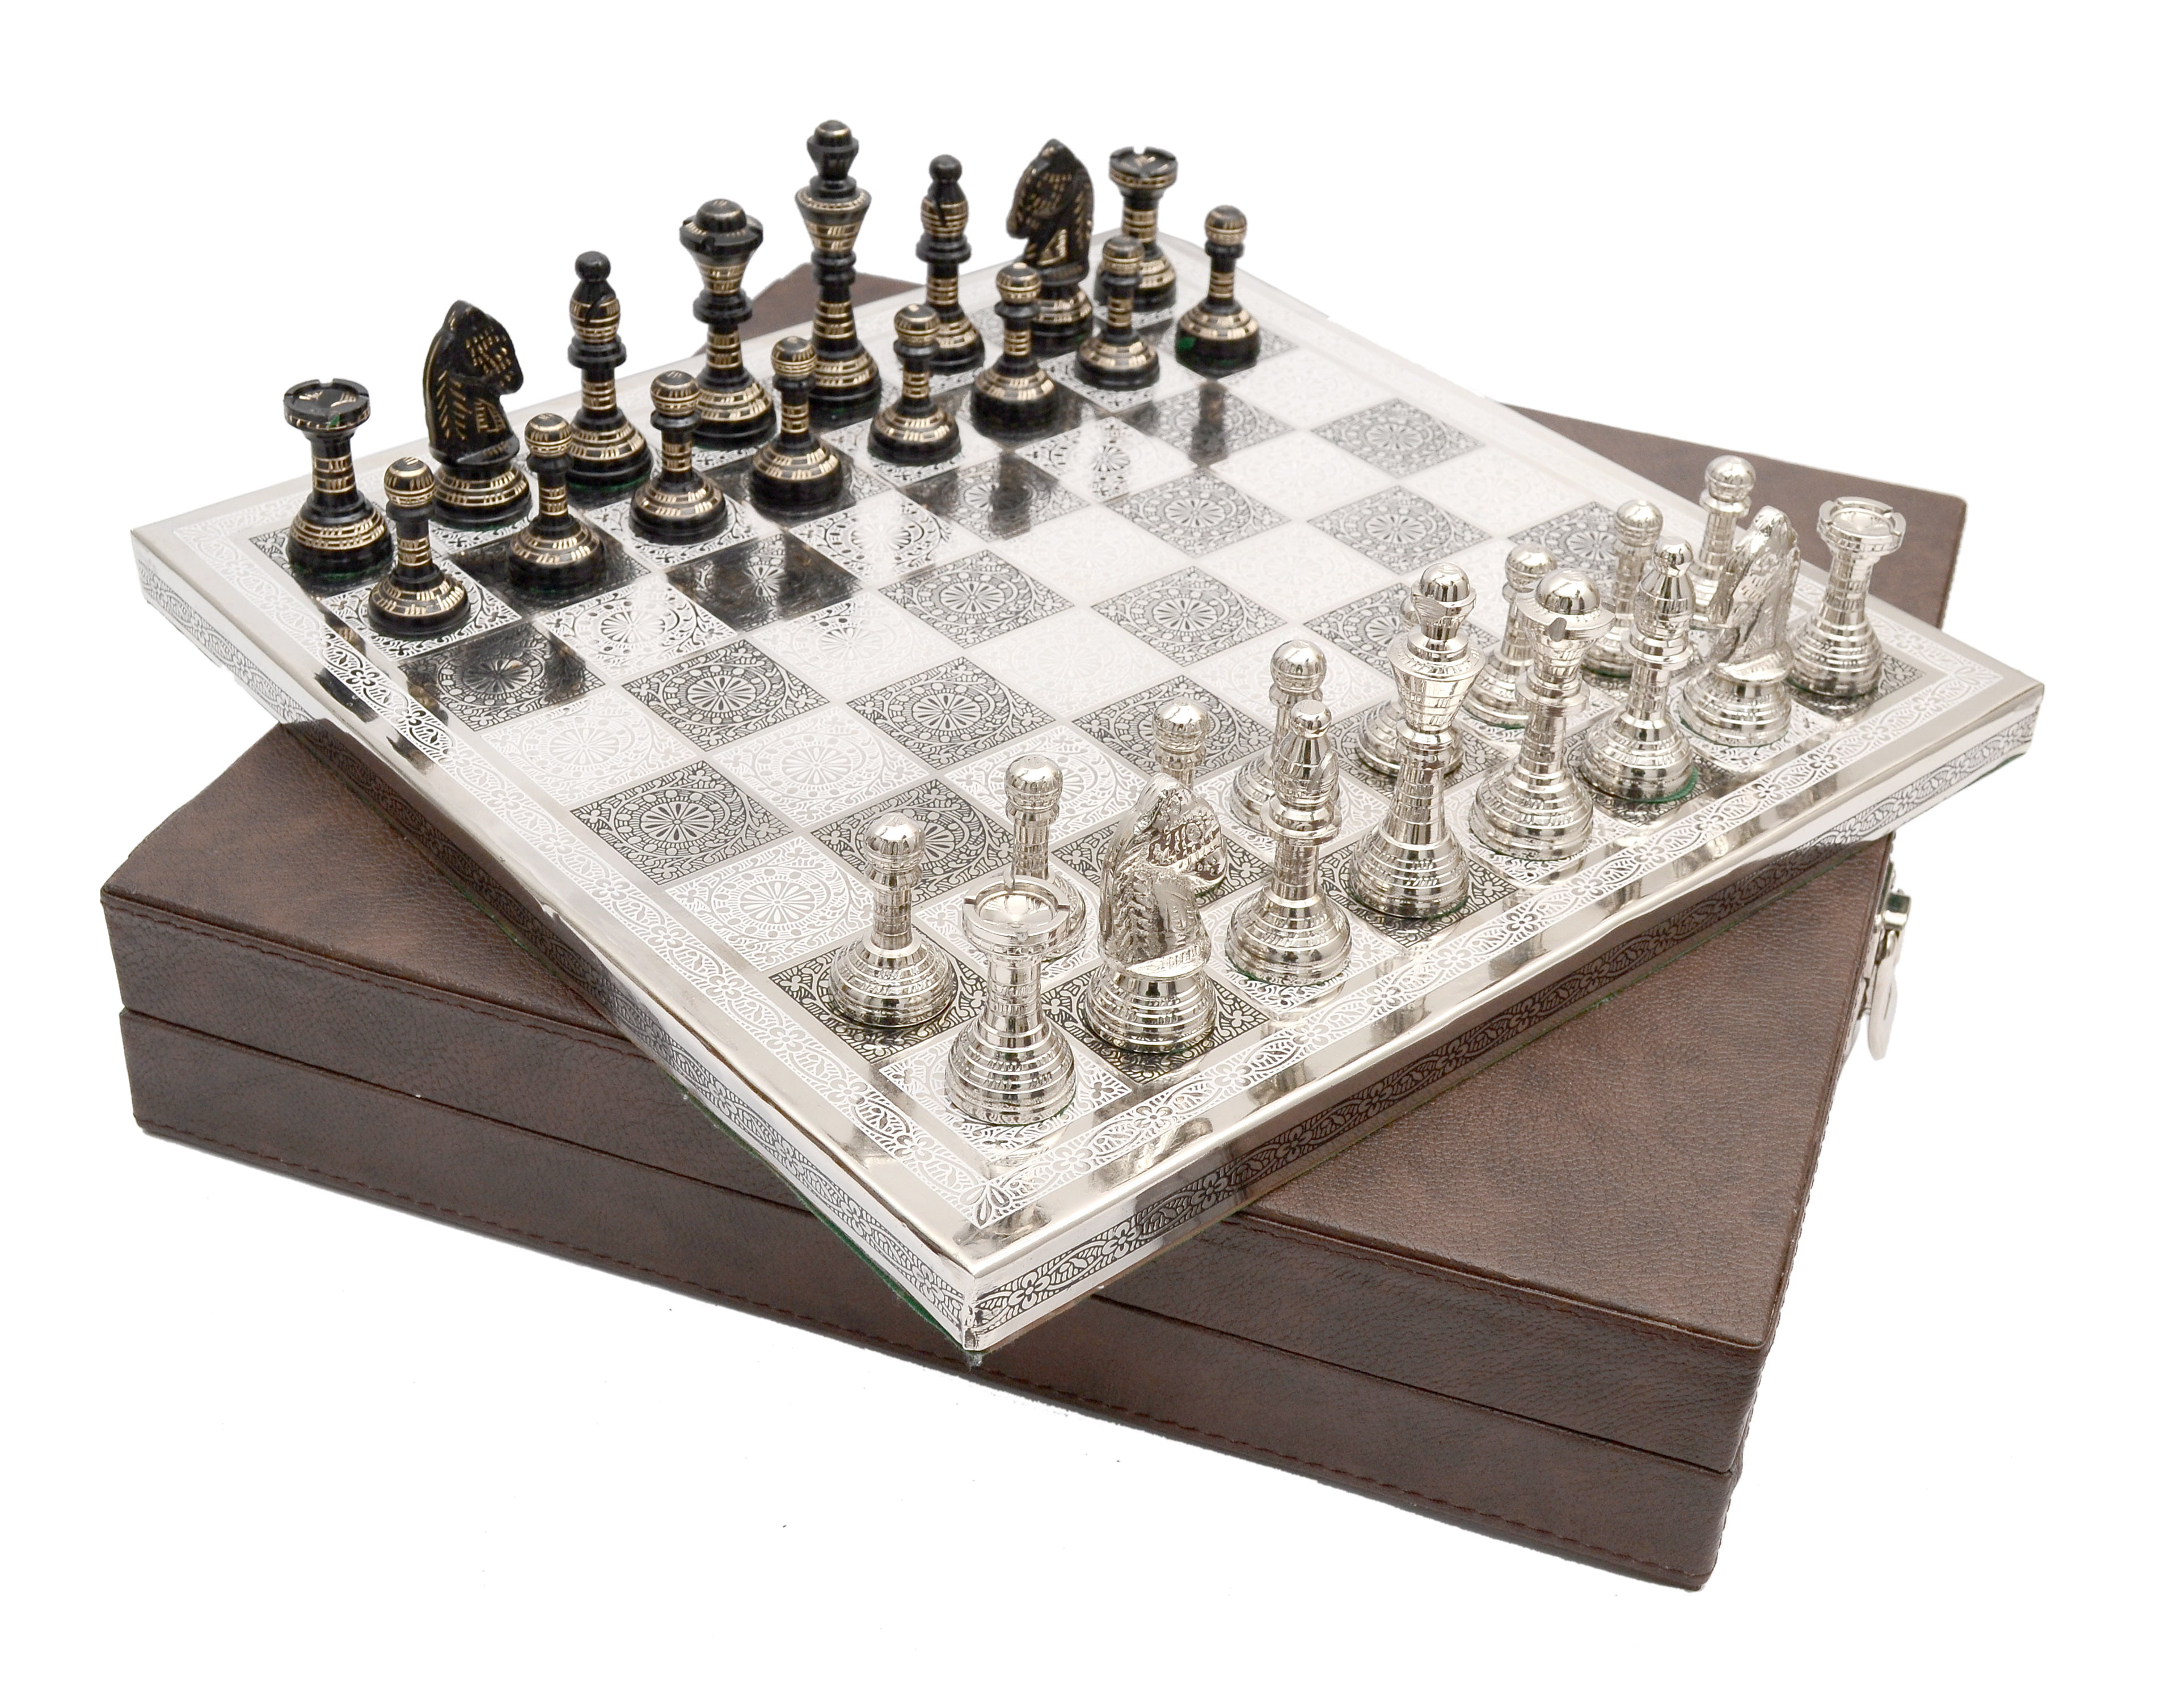 12"x12" Vintage Chess set Chess Board Made of 100%  Premium Brass For Adults 